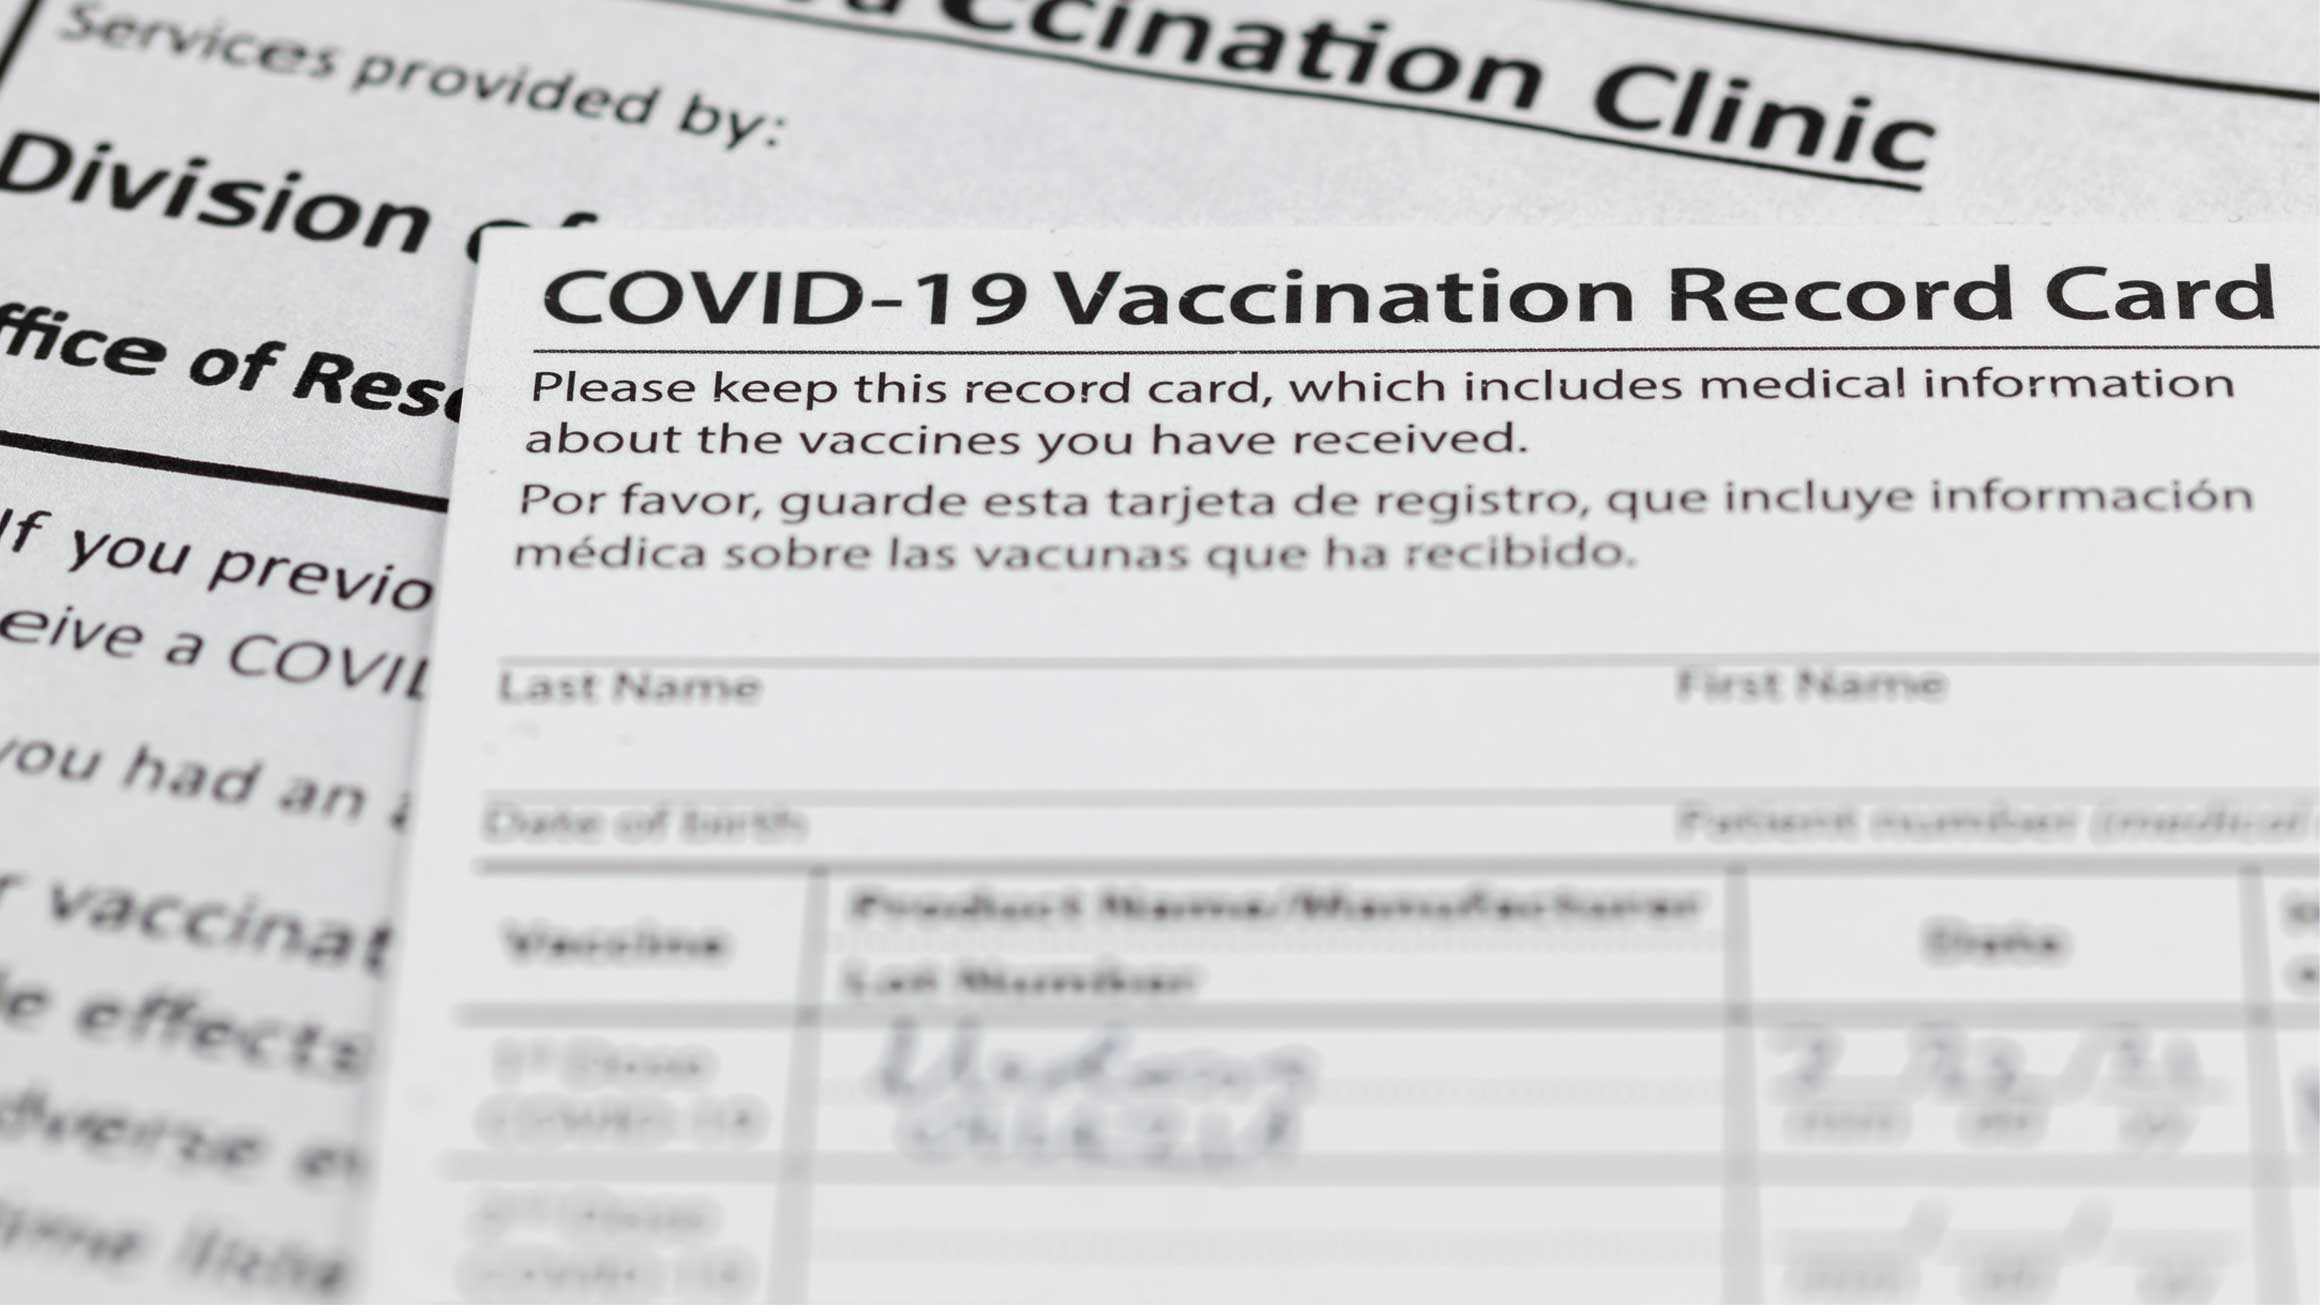 An immunization card for COVID-19 vaccine is shown